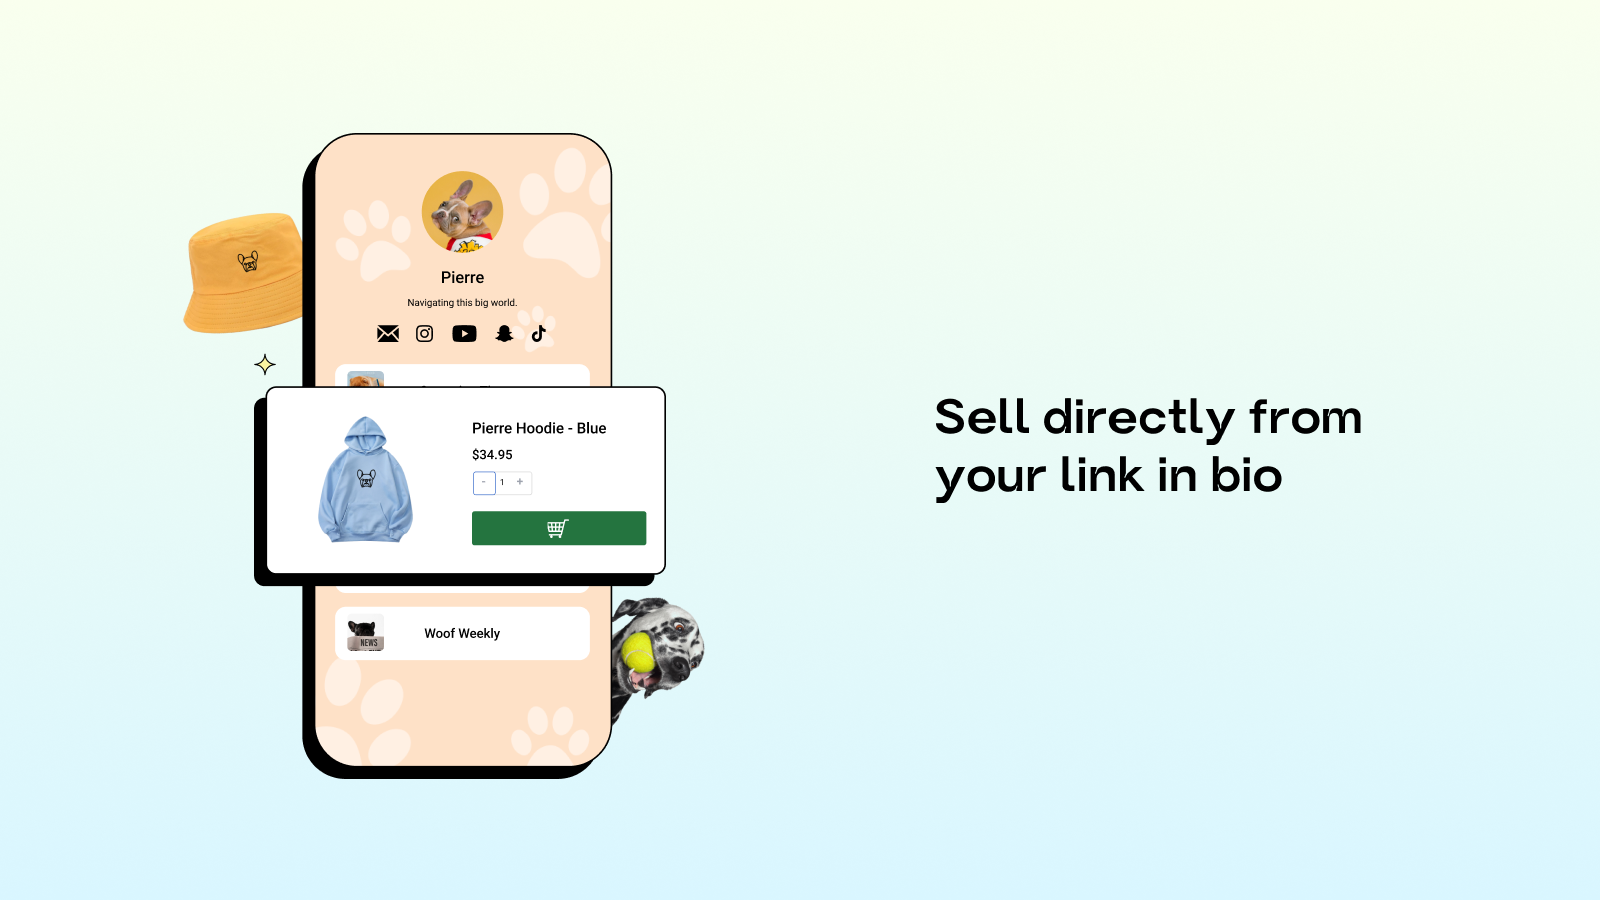 Sell directly from your link in bio